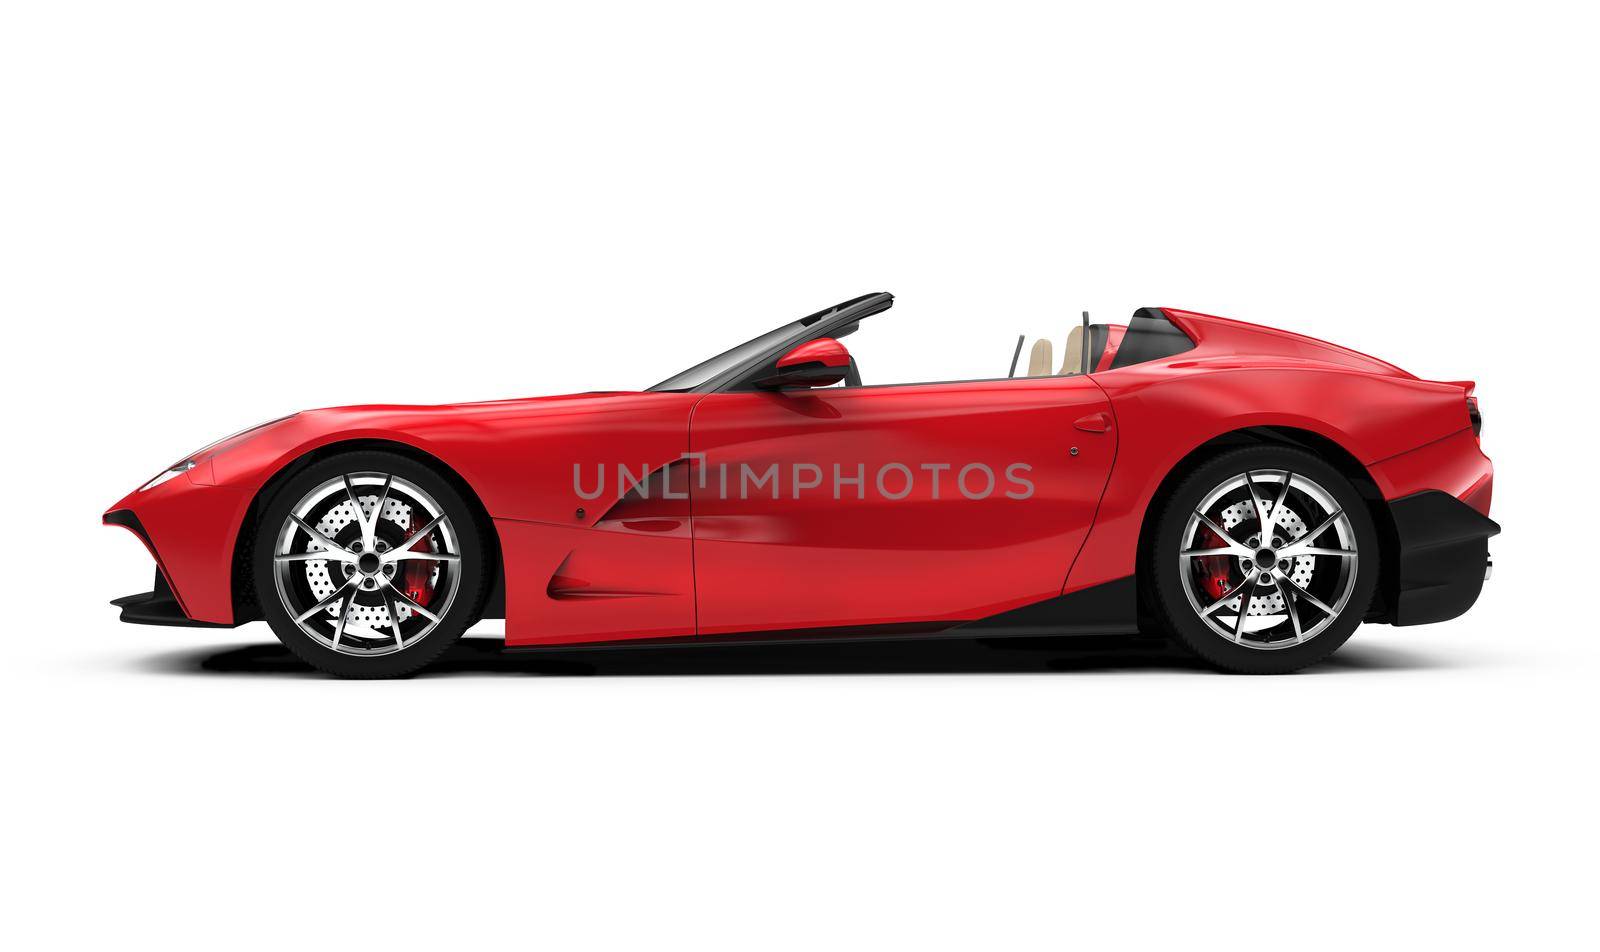 lateral view of a red convertible car by cla78